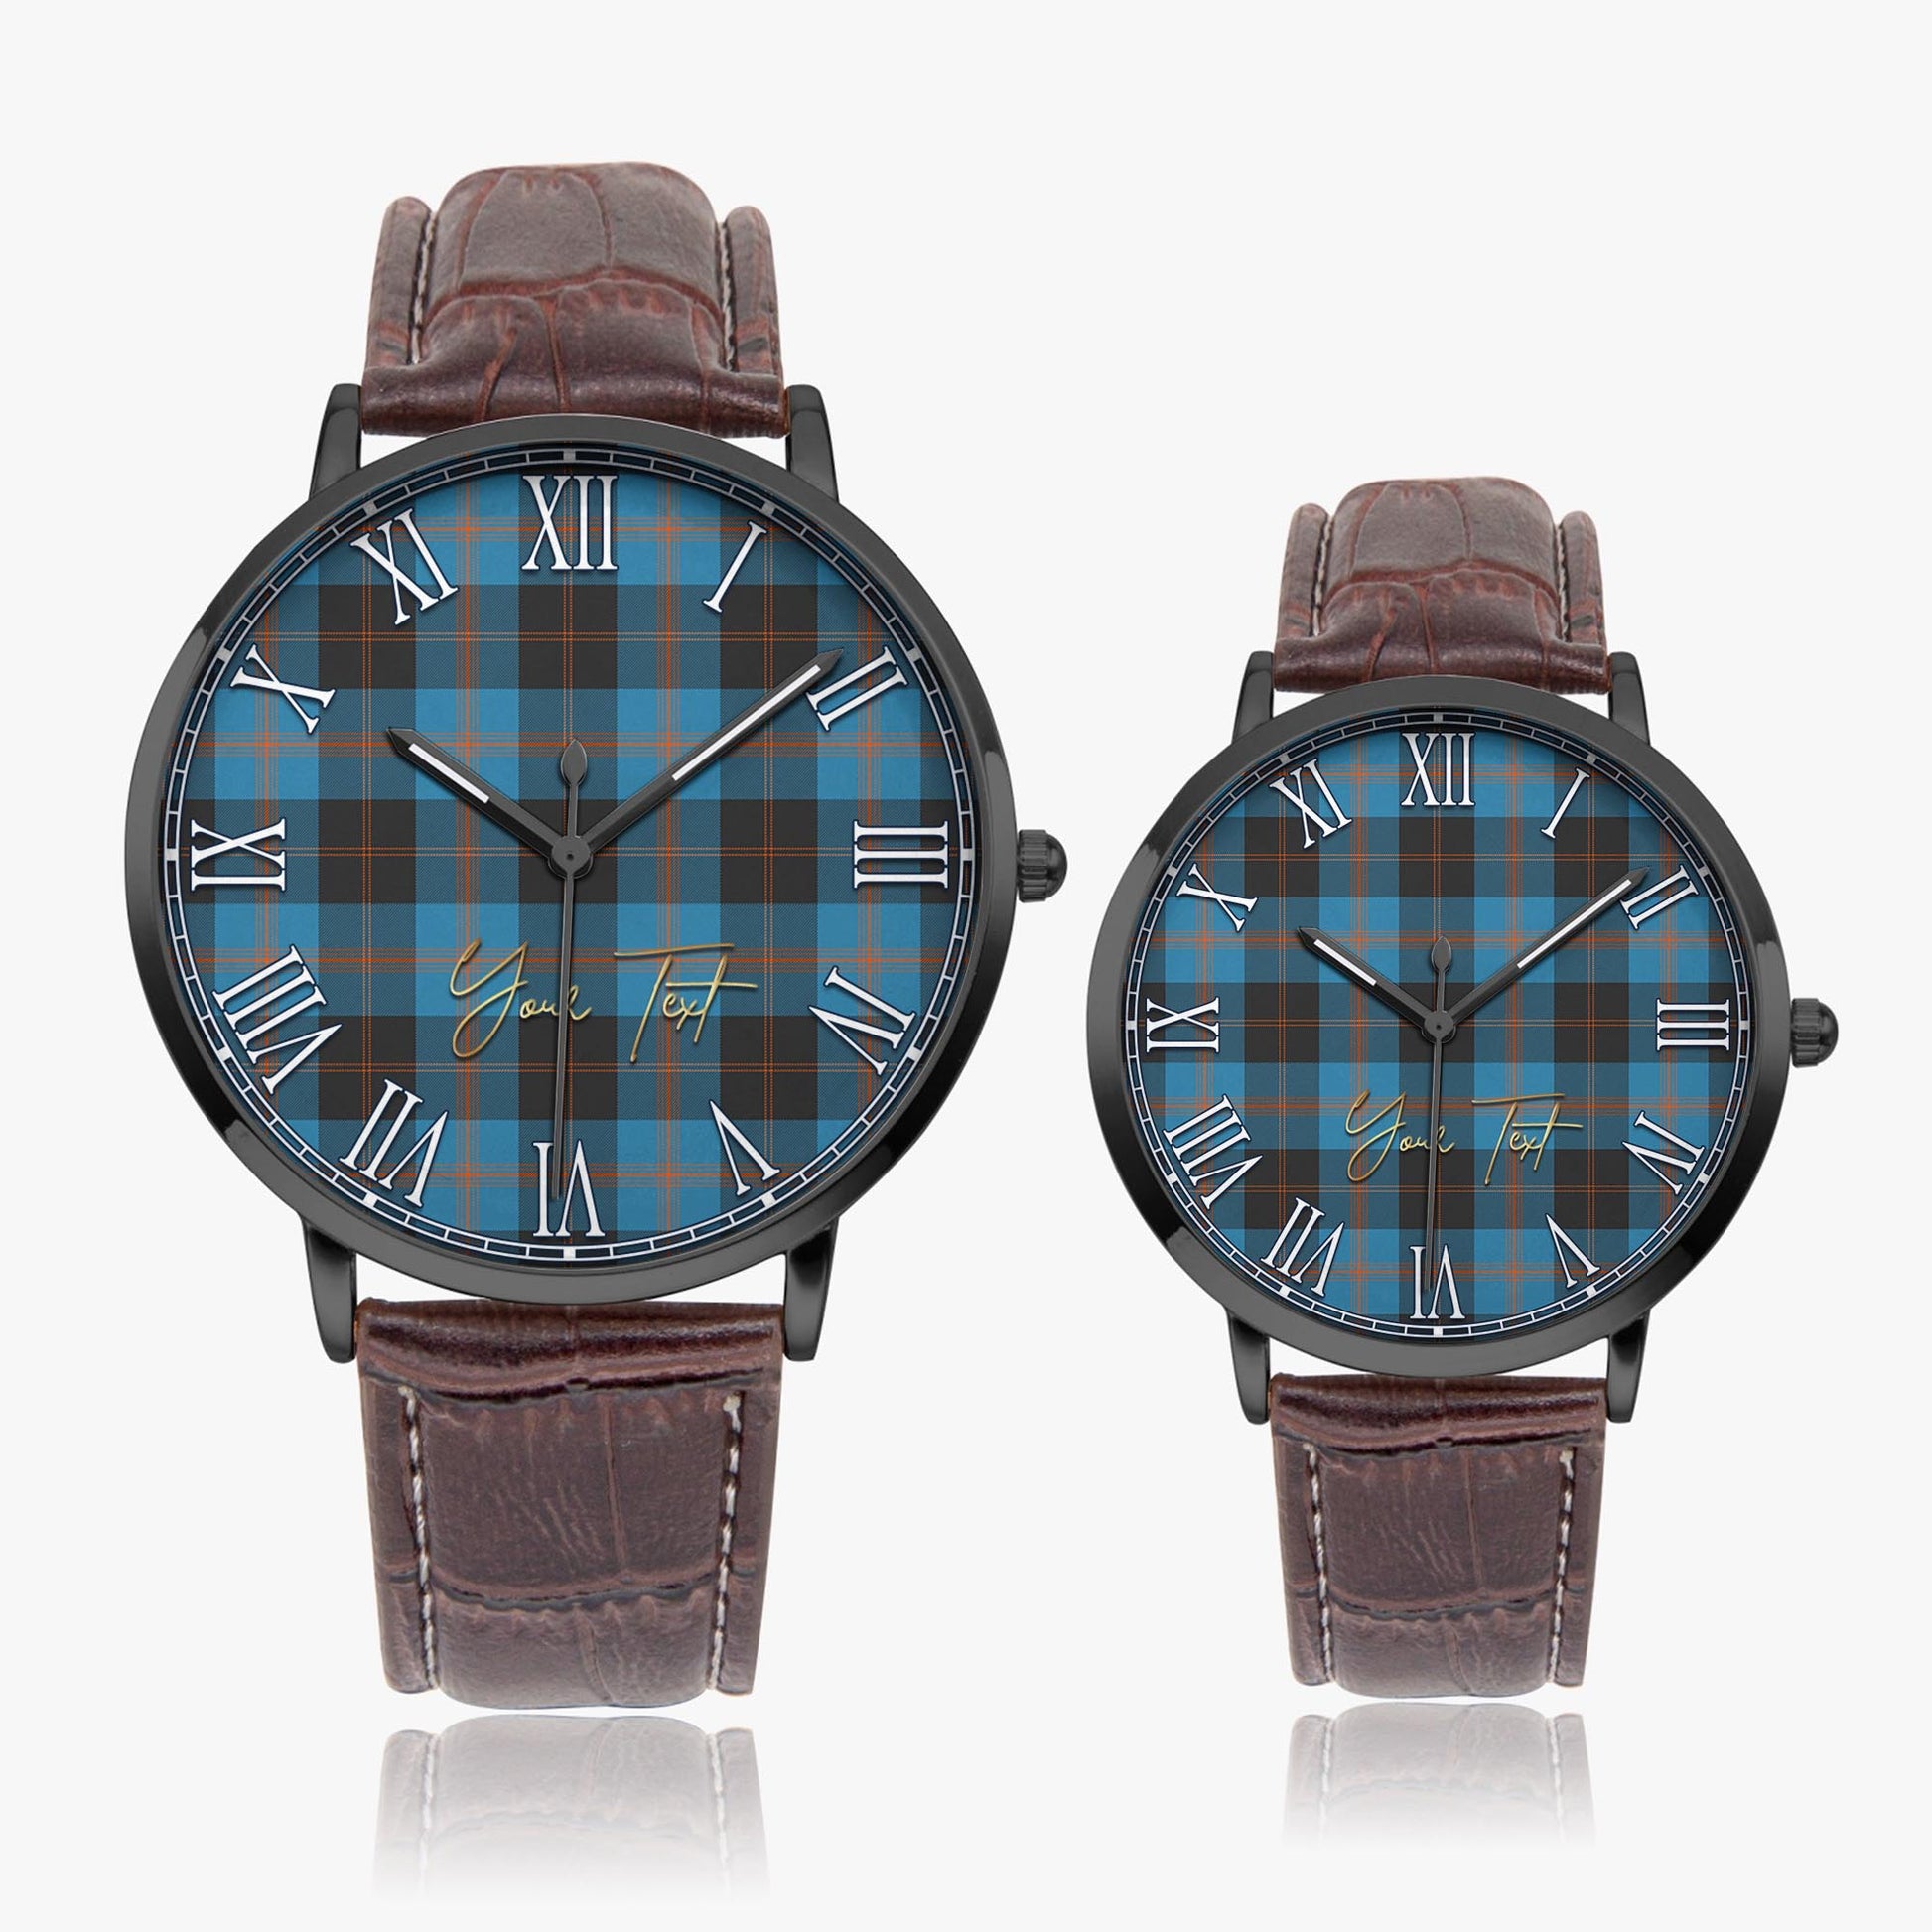 Garden Tartan Personalized Your Text Leather Trap Quartz Watch Ultra Thin Black Case With Brown Leather Strap - Tartanvibesclothing